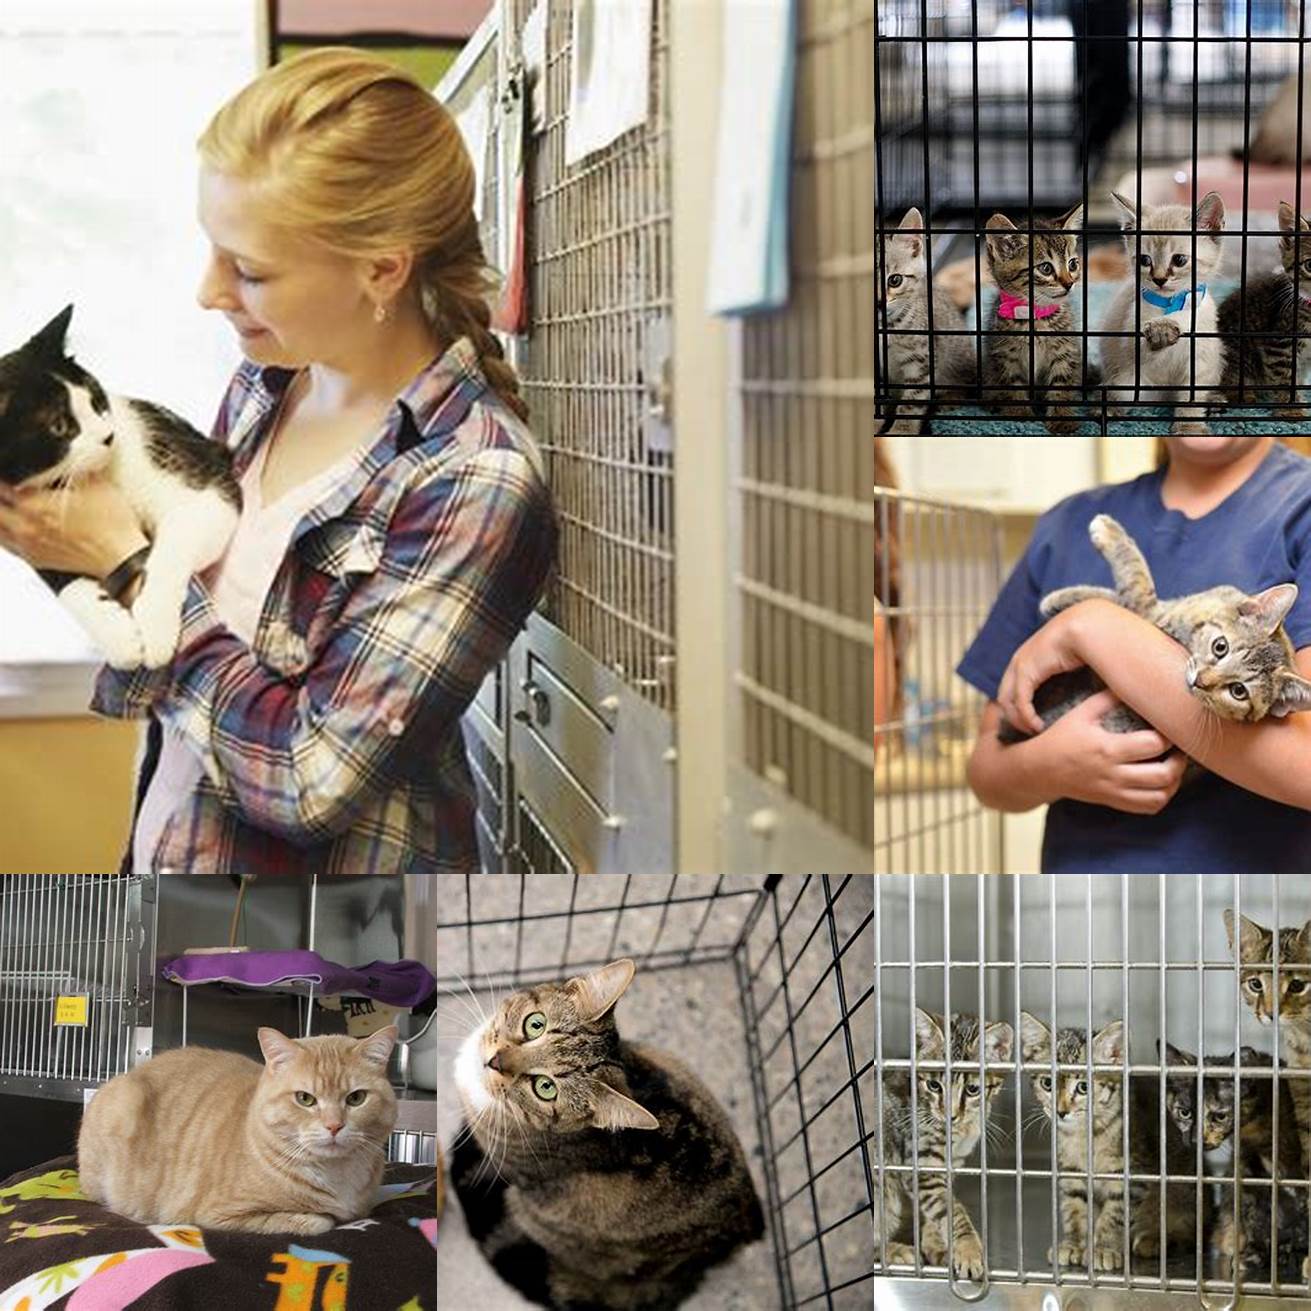 Schedule a visit to the shelter or rescue group